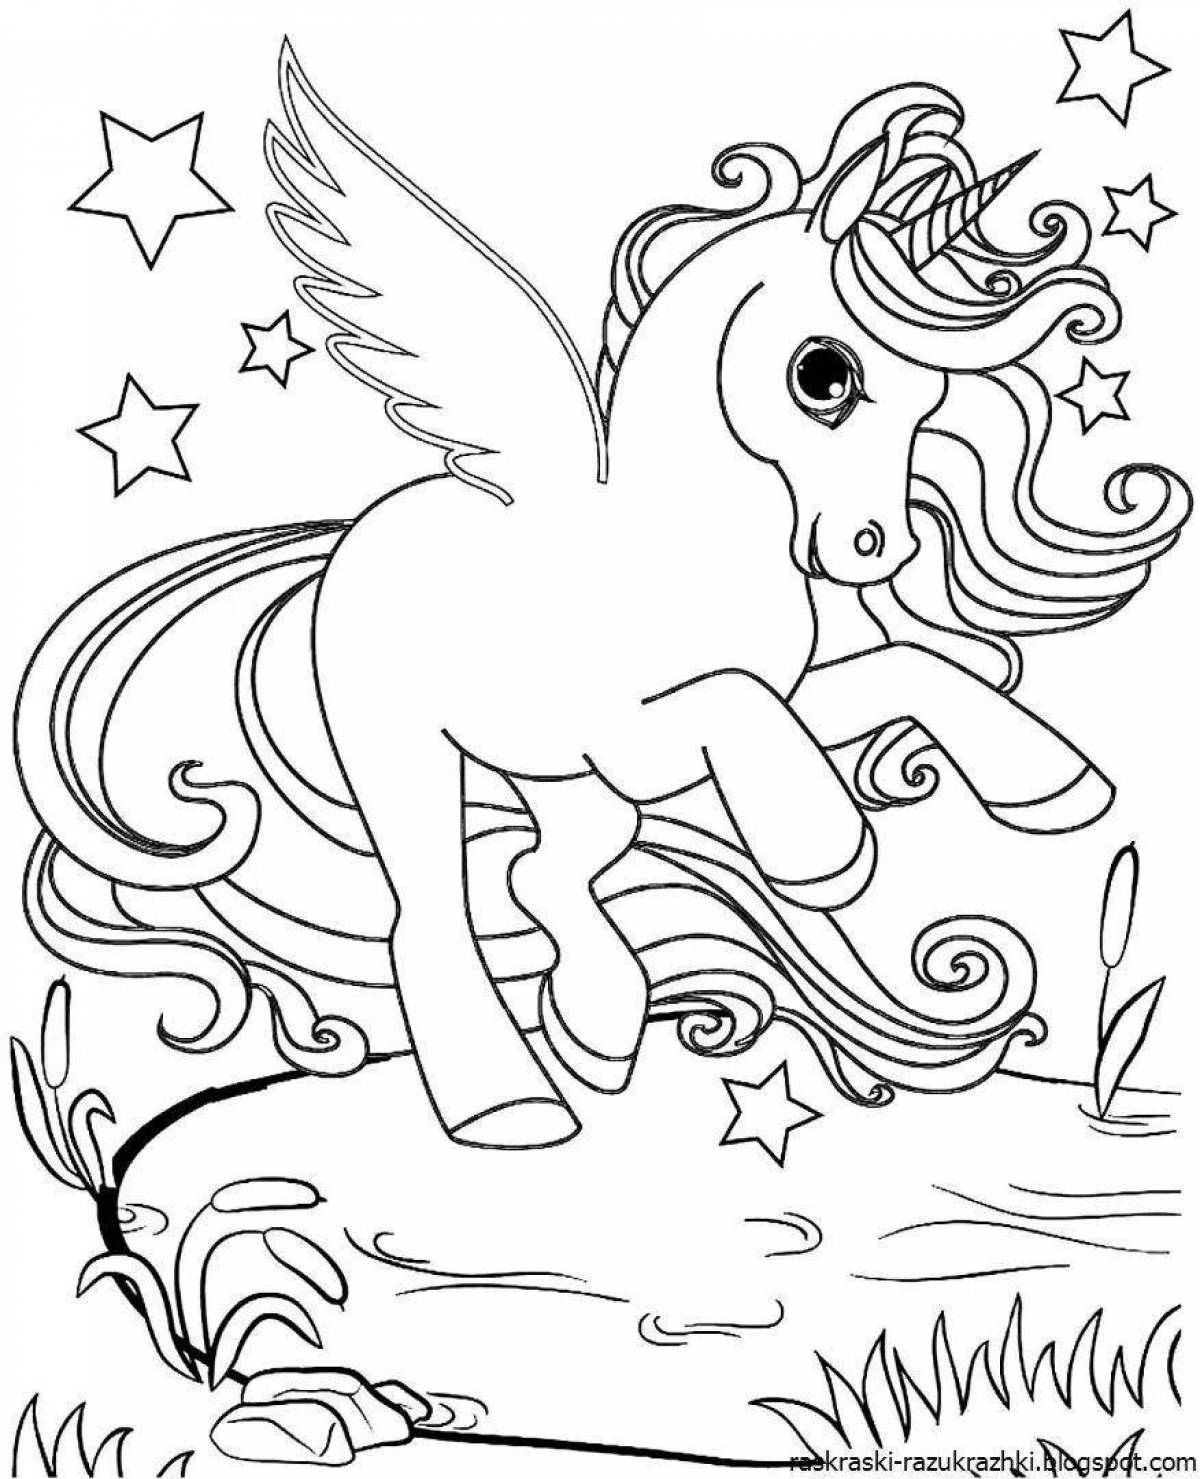 Unicorn drawing for kids #8